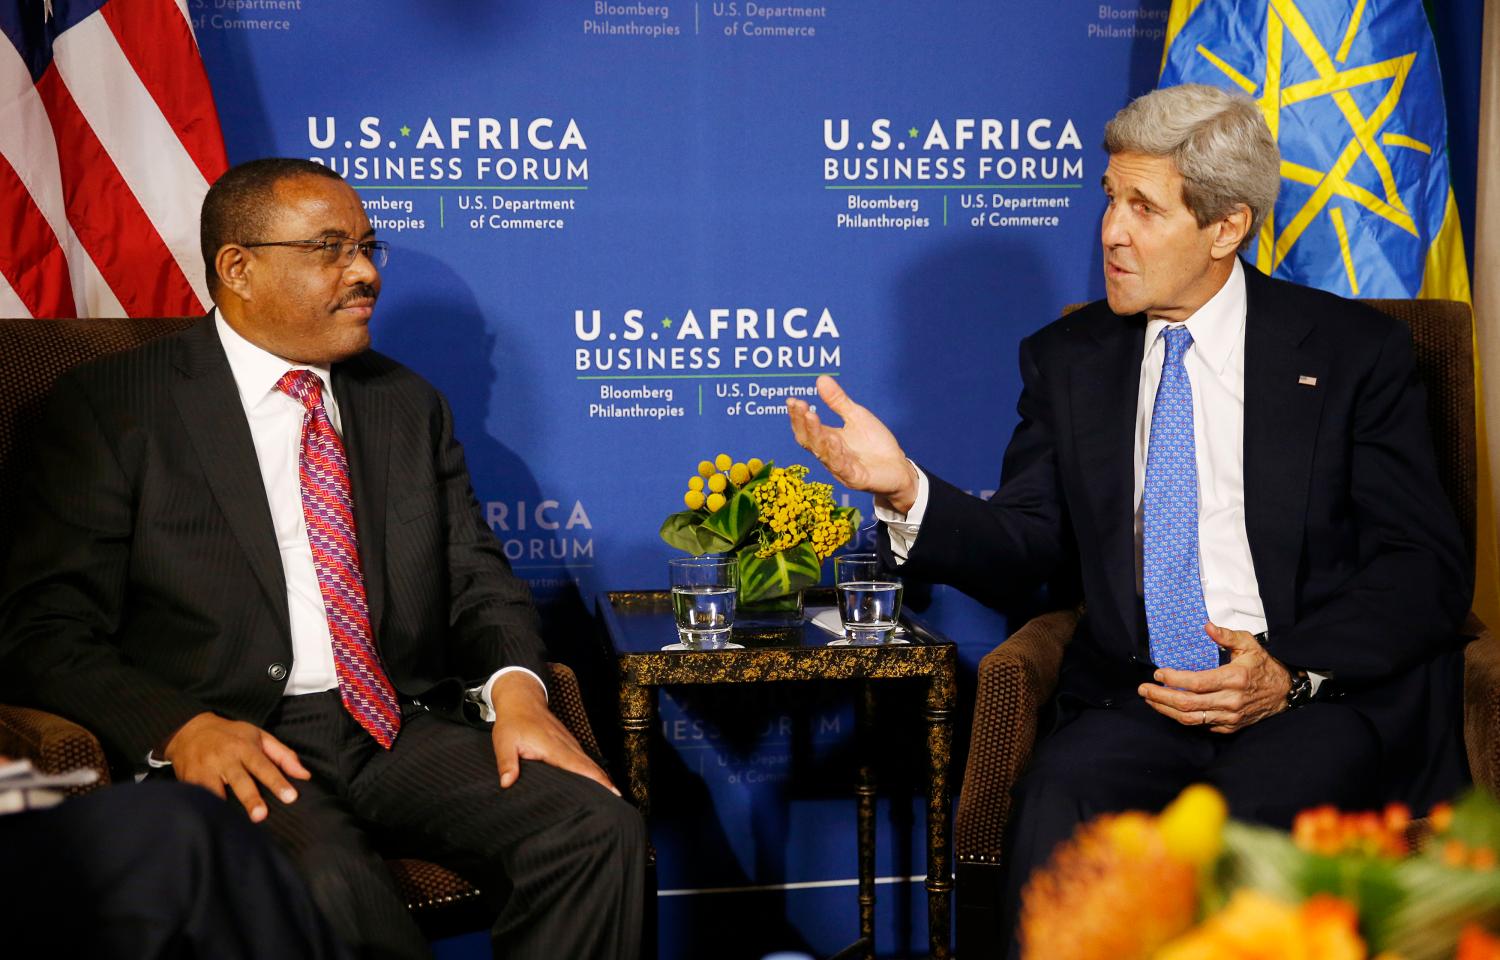 Ethiopia's Prime Minister Hailemariam Desalegn talks with U.S. Secretary of State John Kerry at the start of a bilateral meeting at the U.S.-Africa Business Forum in Washington